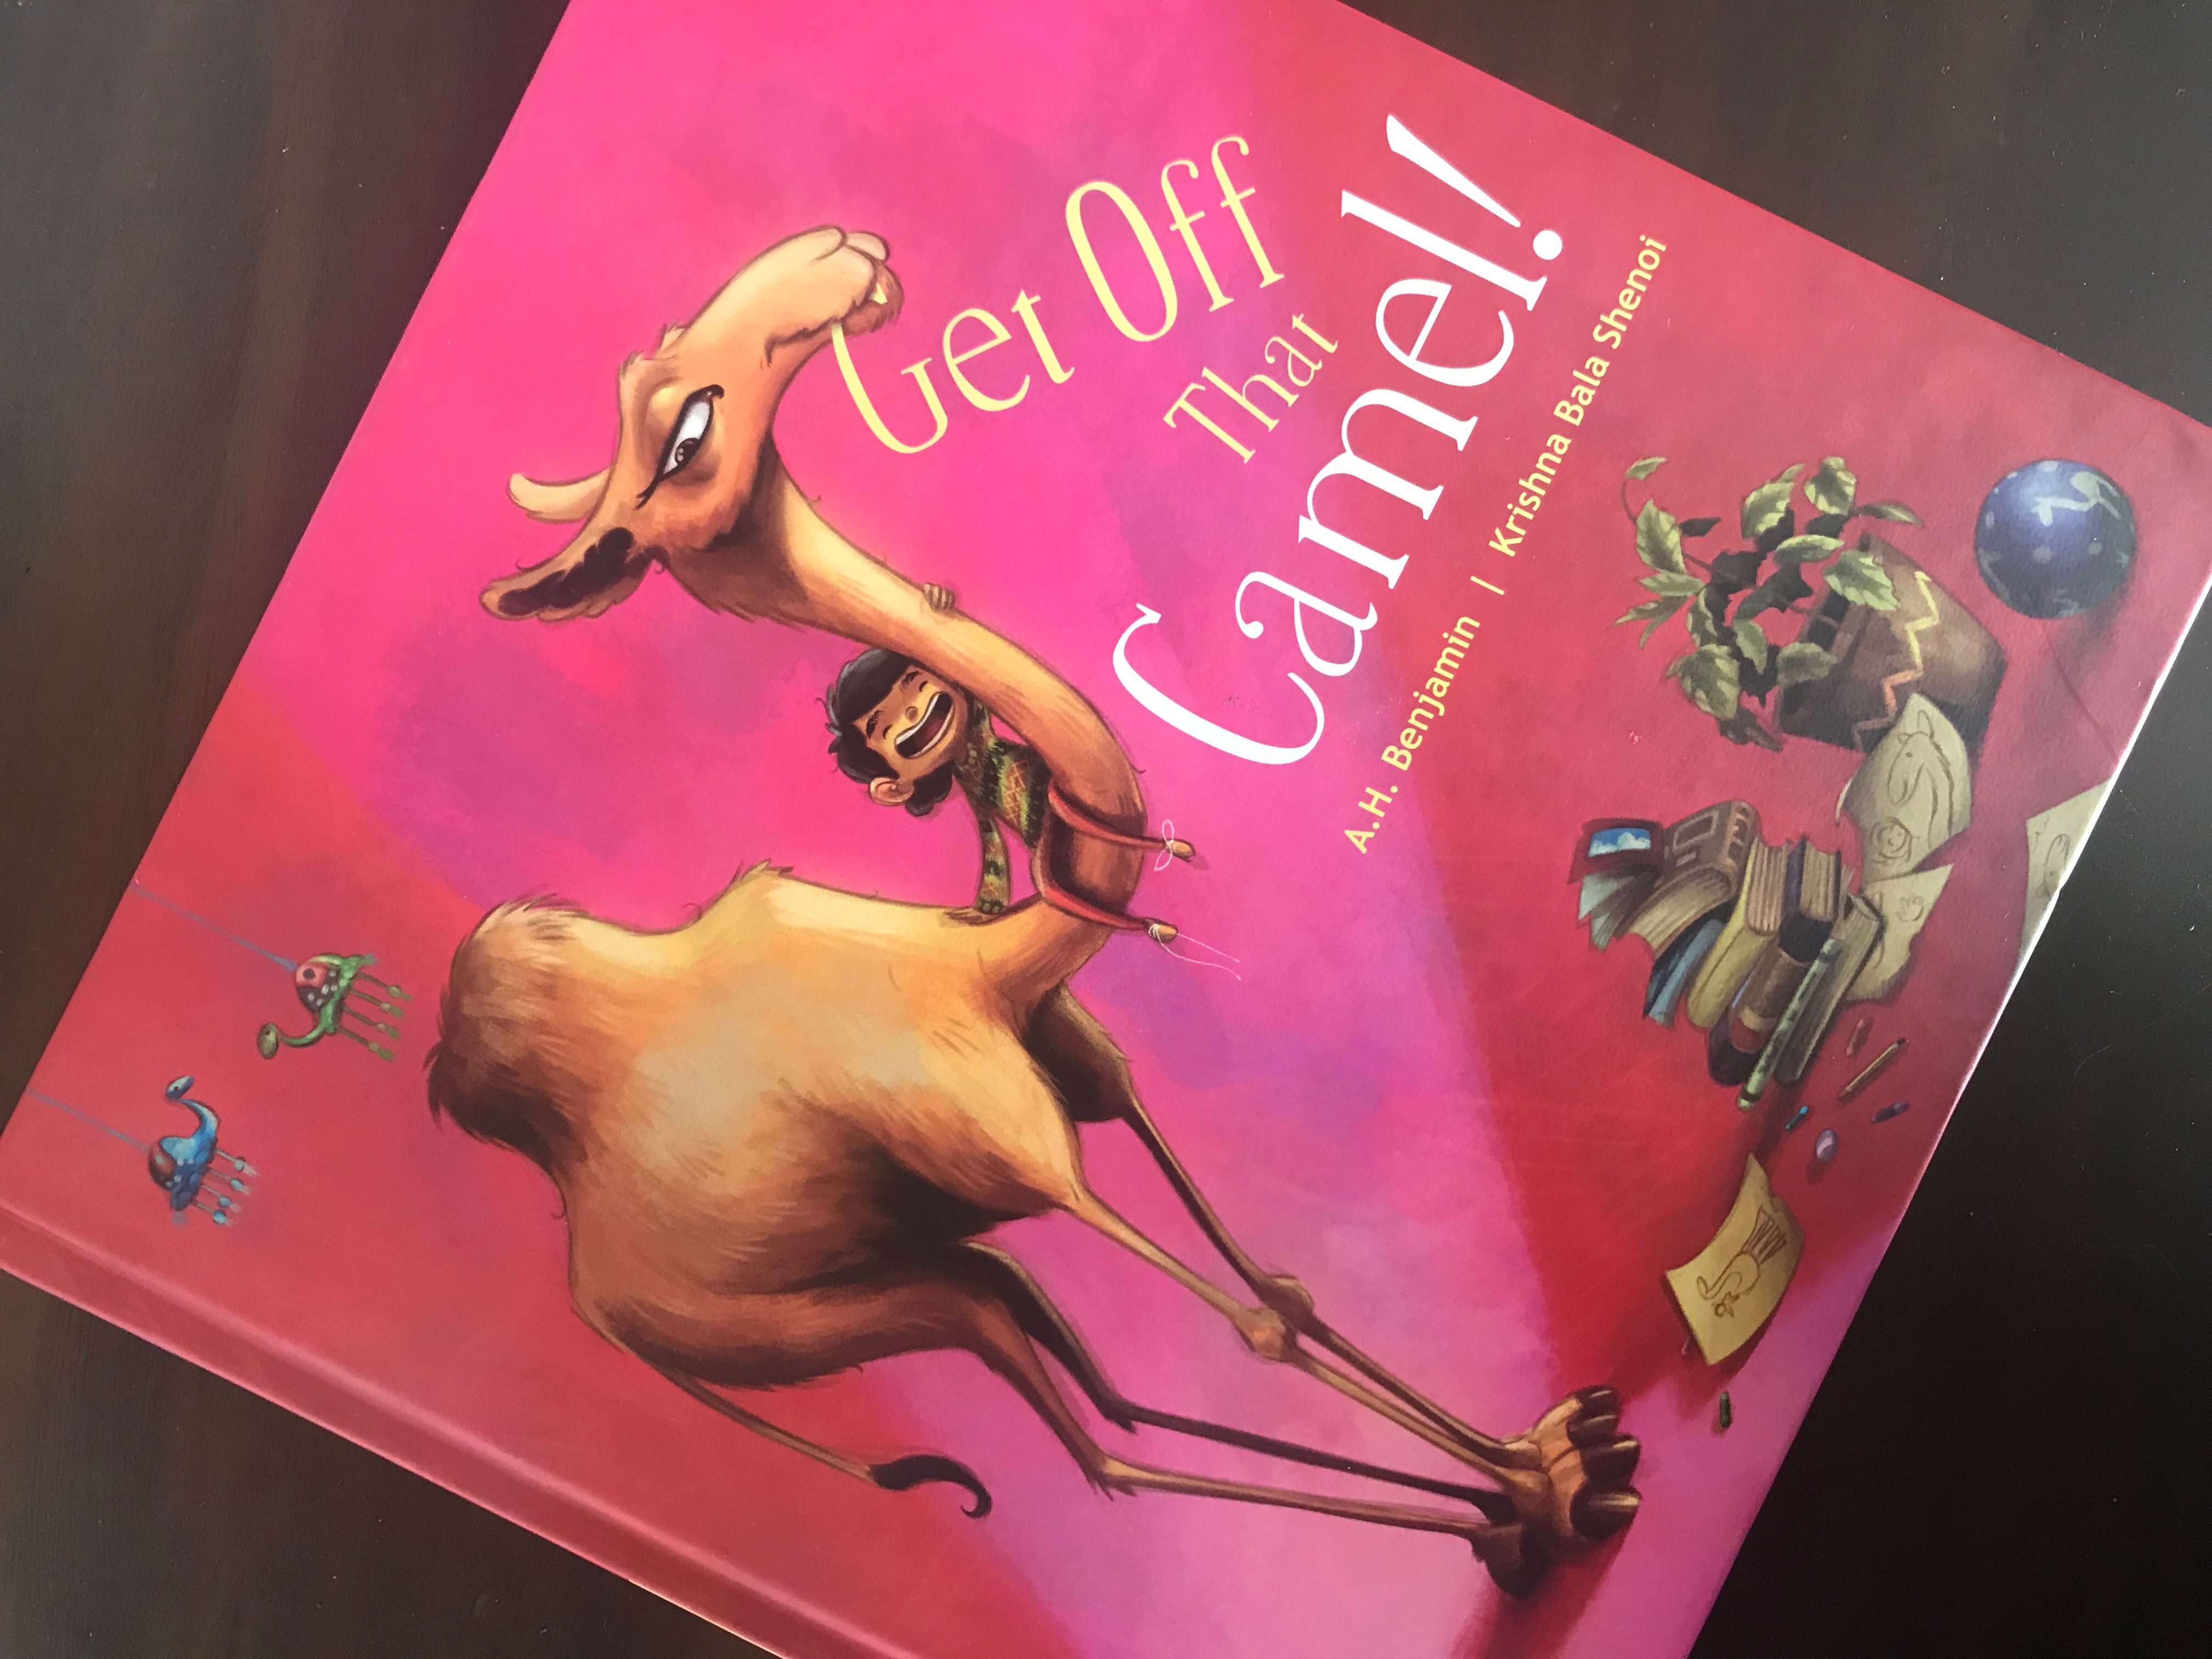 You are currently viewing Get off that Camel by A.H. Benjamin- a delightful picture book for young children